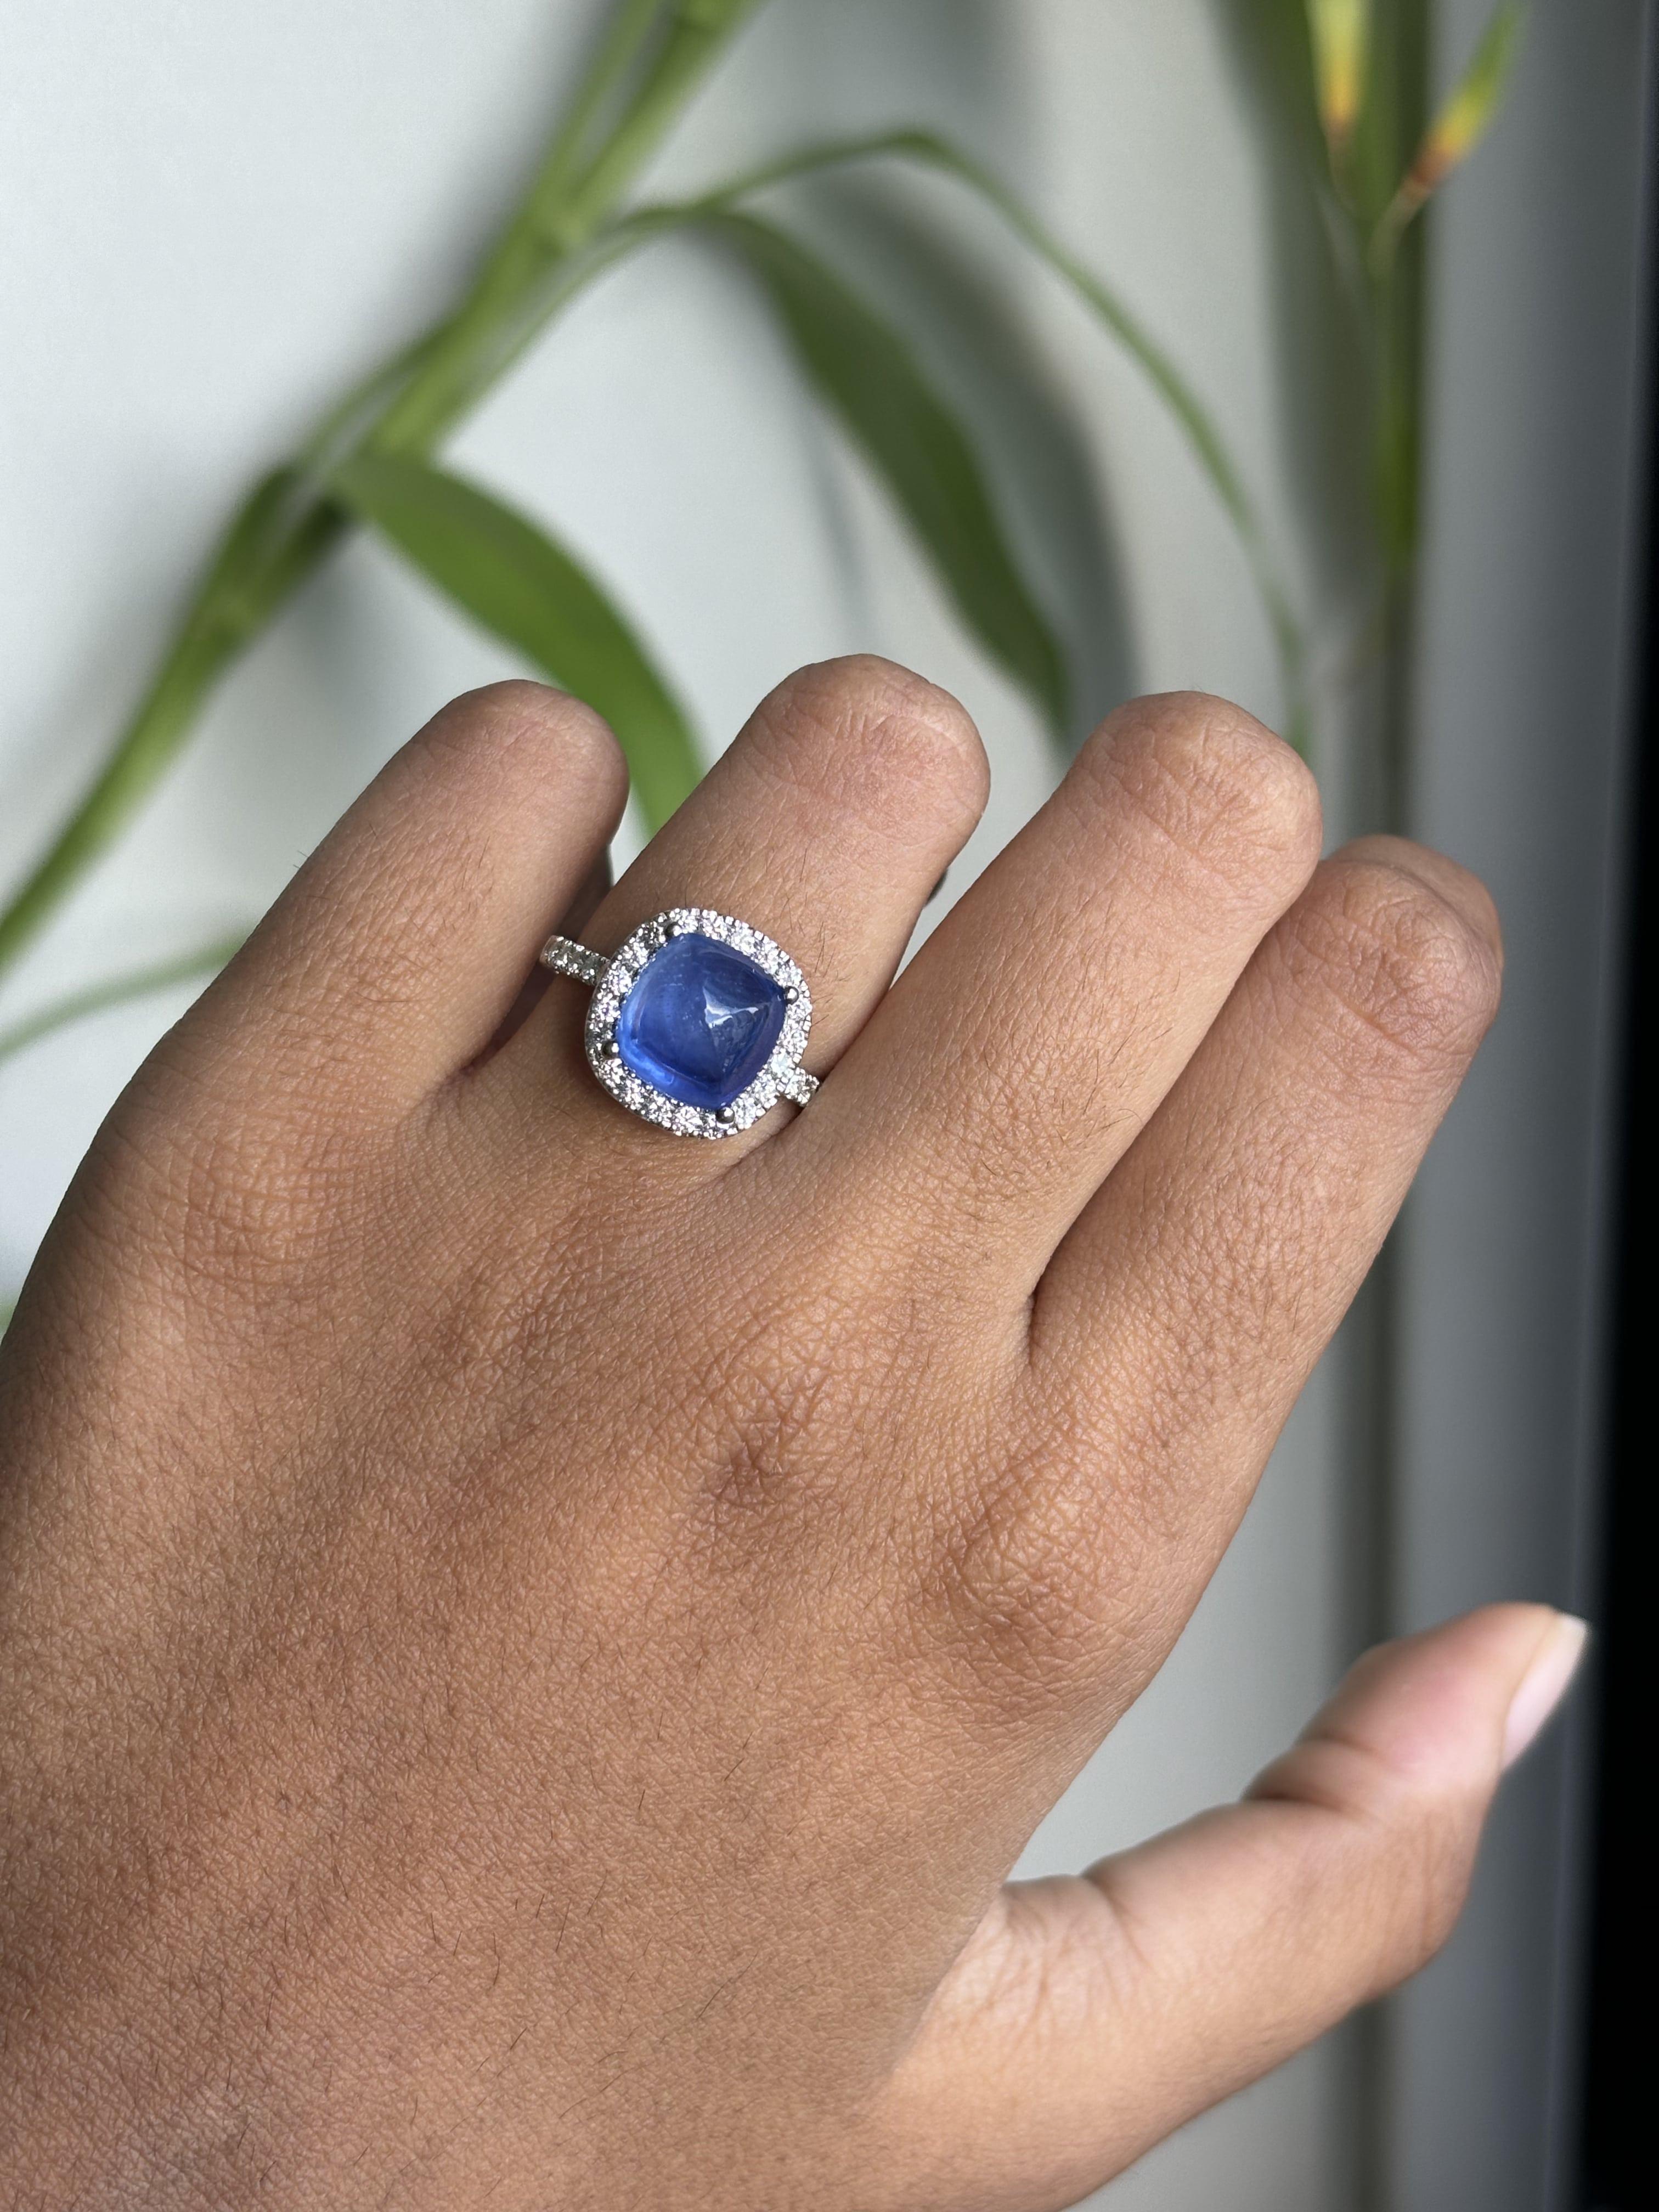 Victorian 4.23 Carat Sugarloaf Ceylon Sapphire Ring with Halo Diamonds in 14K White Gold For Sale